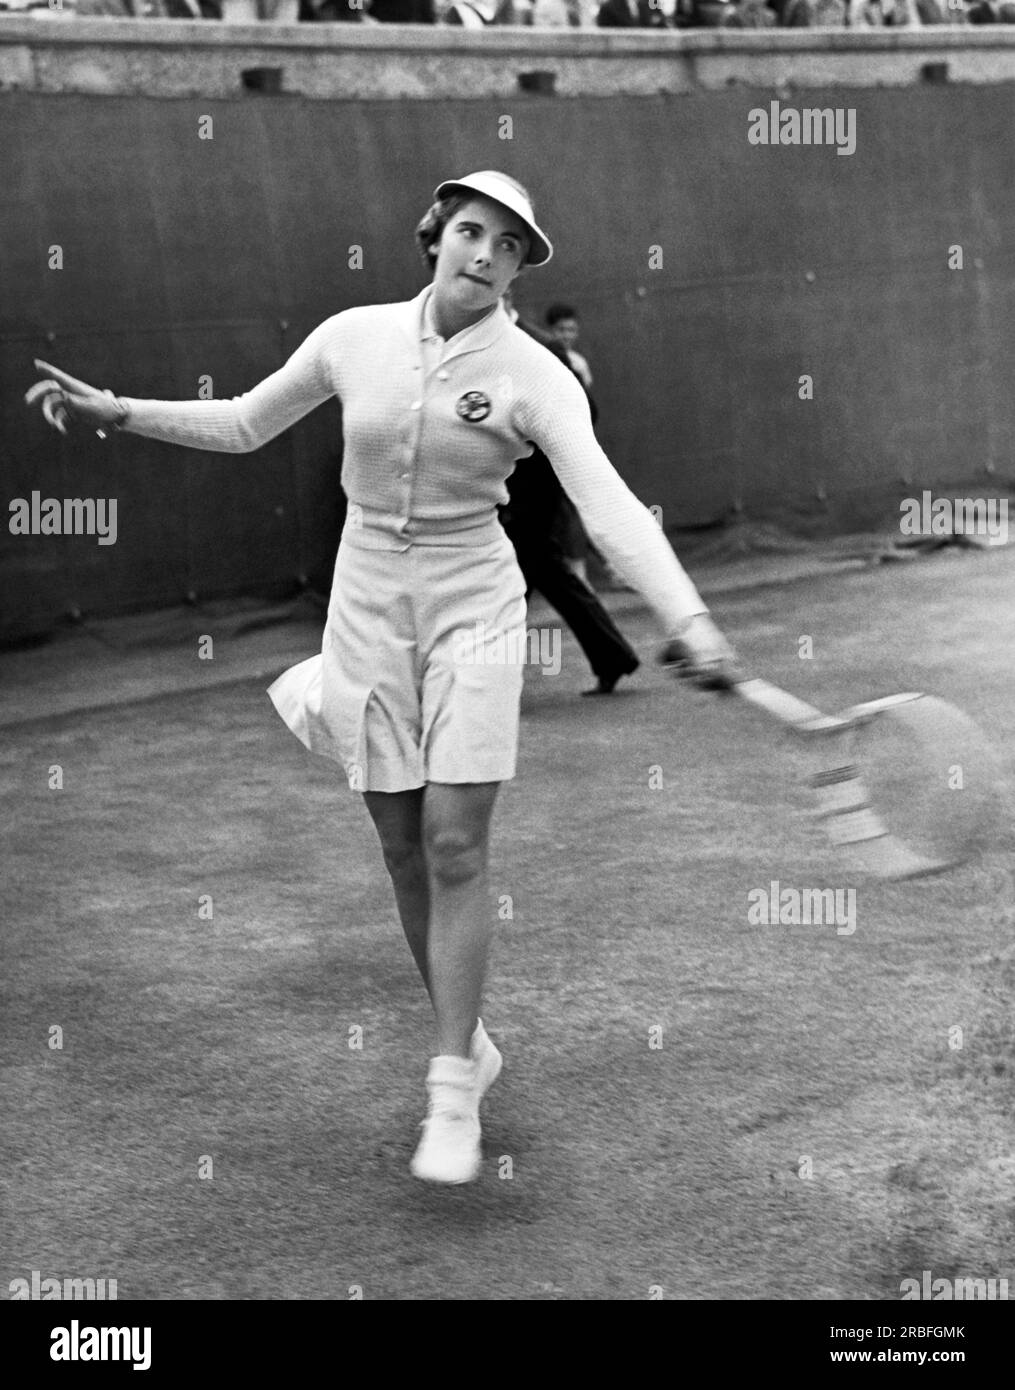 Forest Hills, New York:  September 7, 1936 British tennis star Katherine Stammers hits a backhand in a match during the National Tennis Singles Championships being held at the West Side Club. Stock Photo